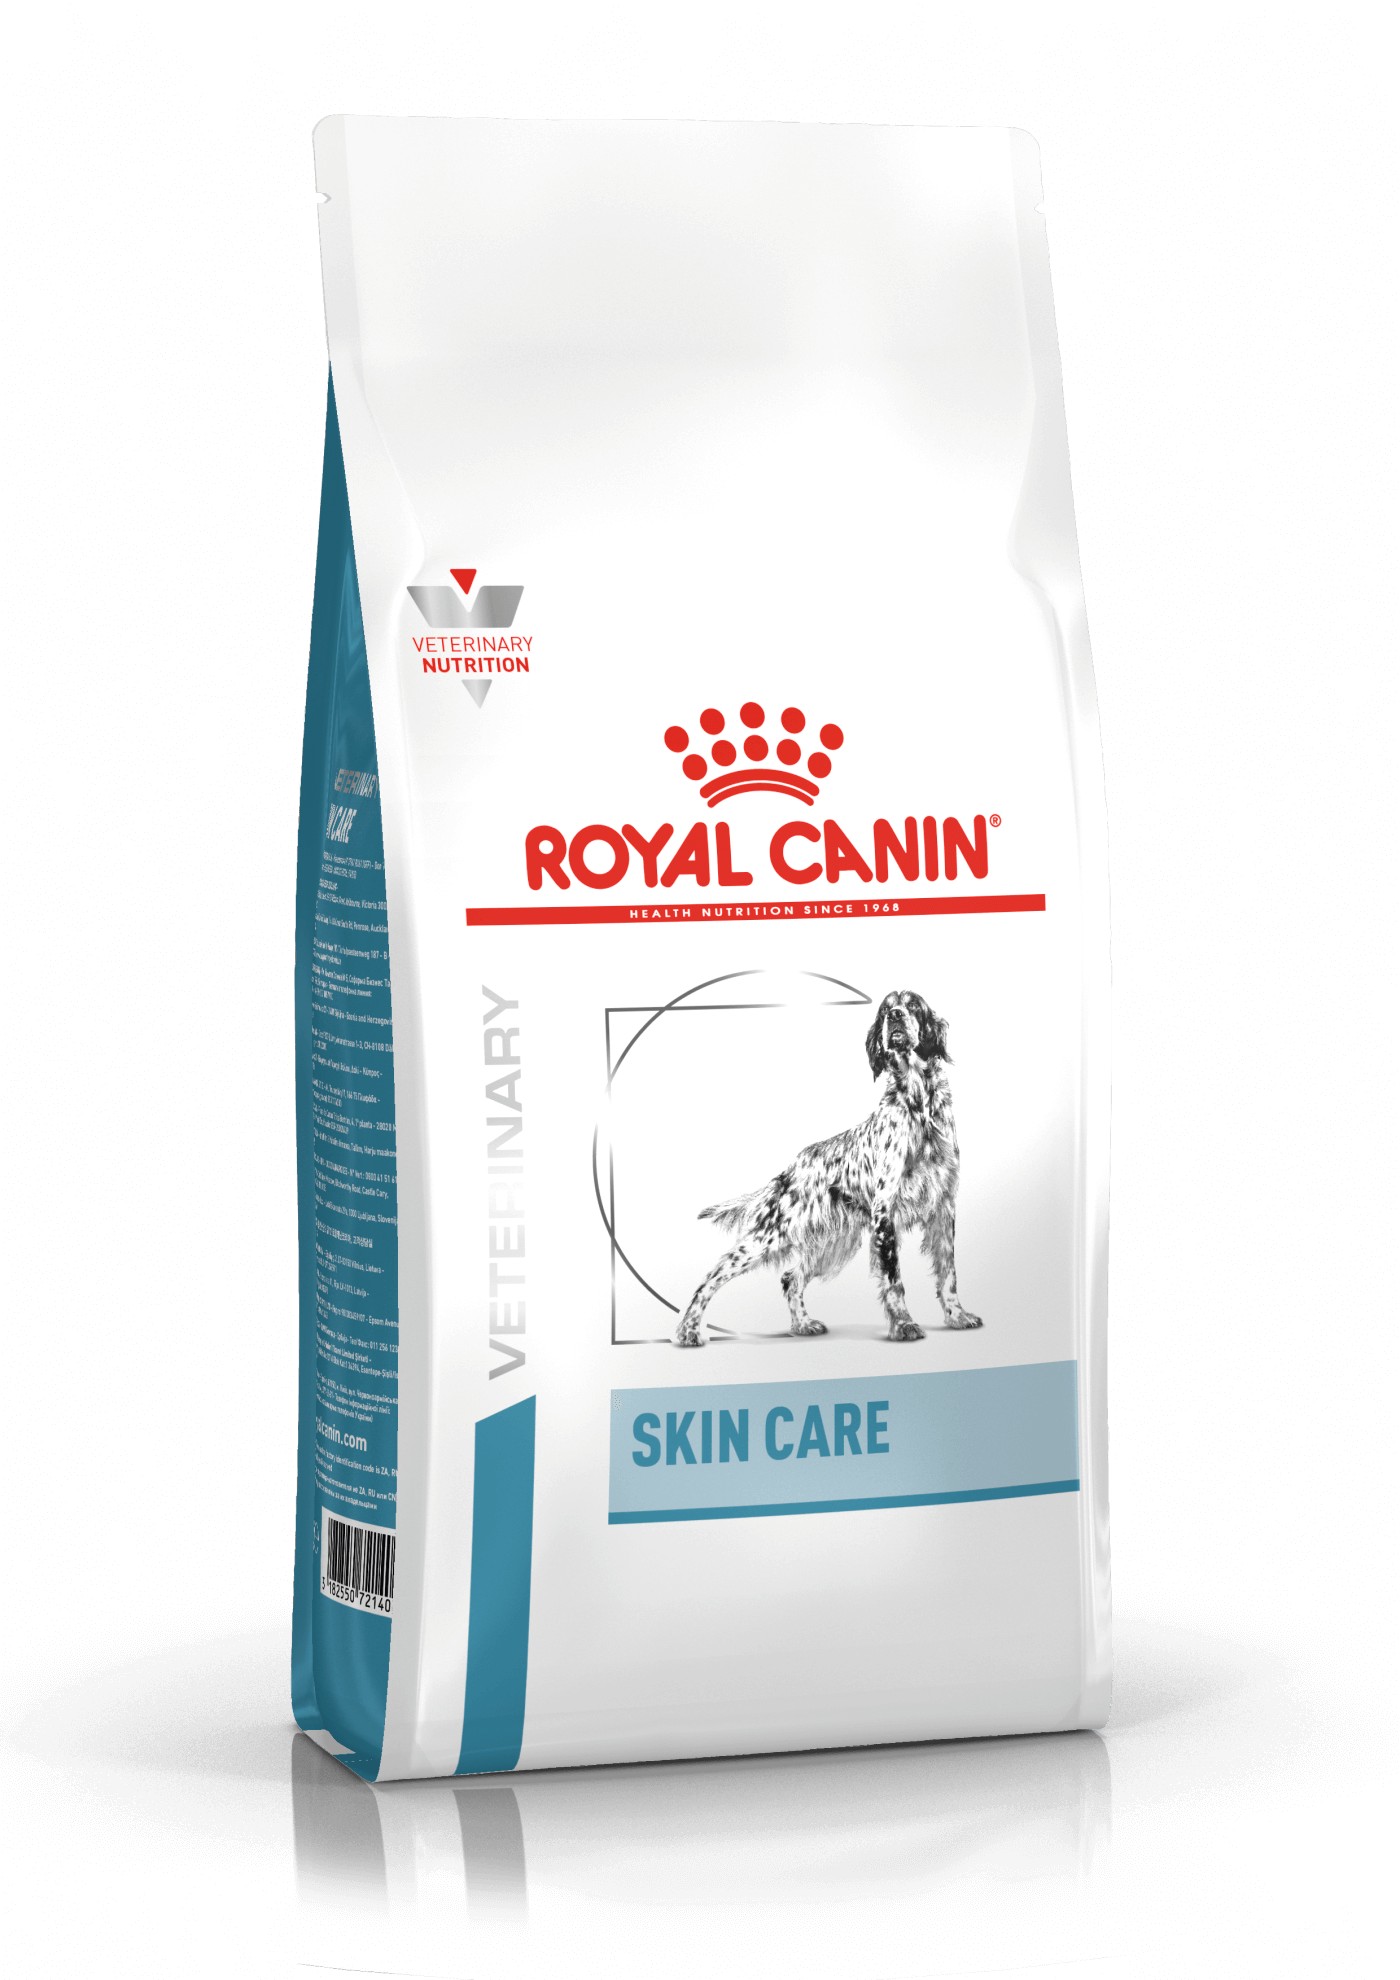 Royal Canin Veterinary Skin Care pour chien